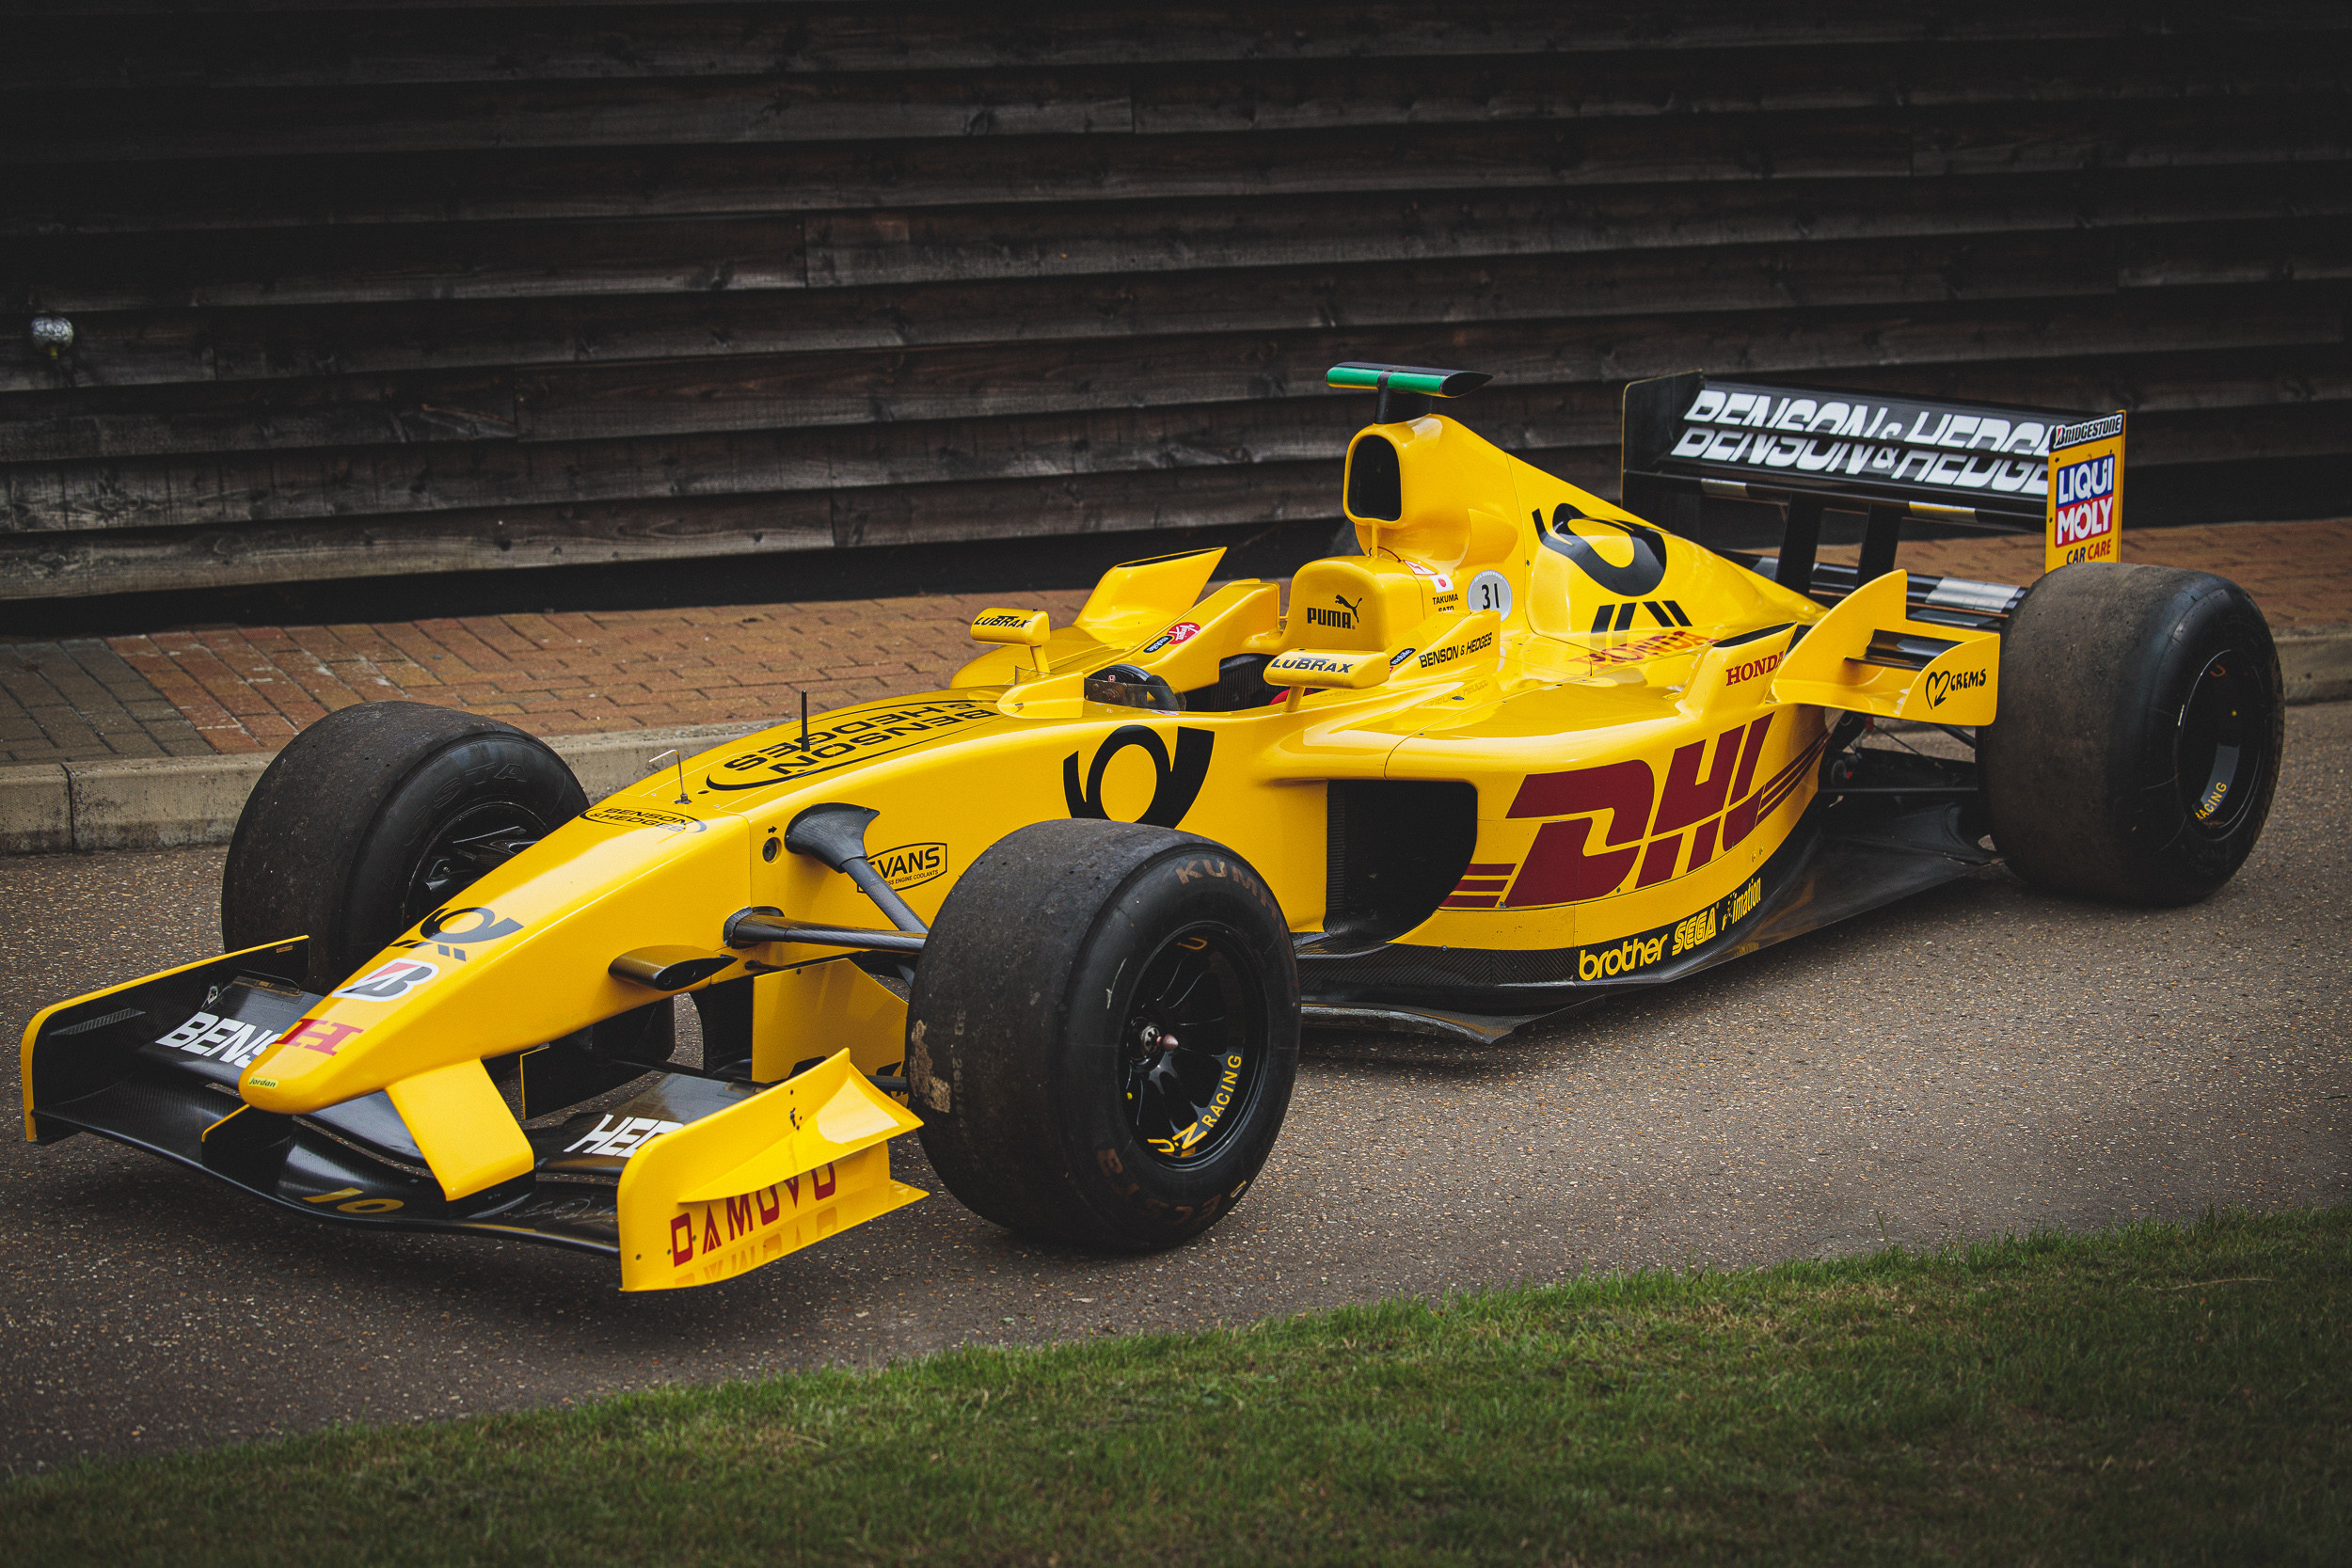 A 2002 Jordan F1 Car Driven By Sato Is For Sale | Carscoops